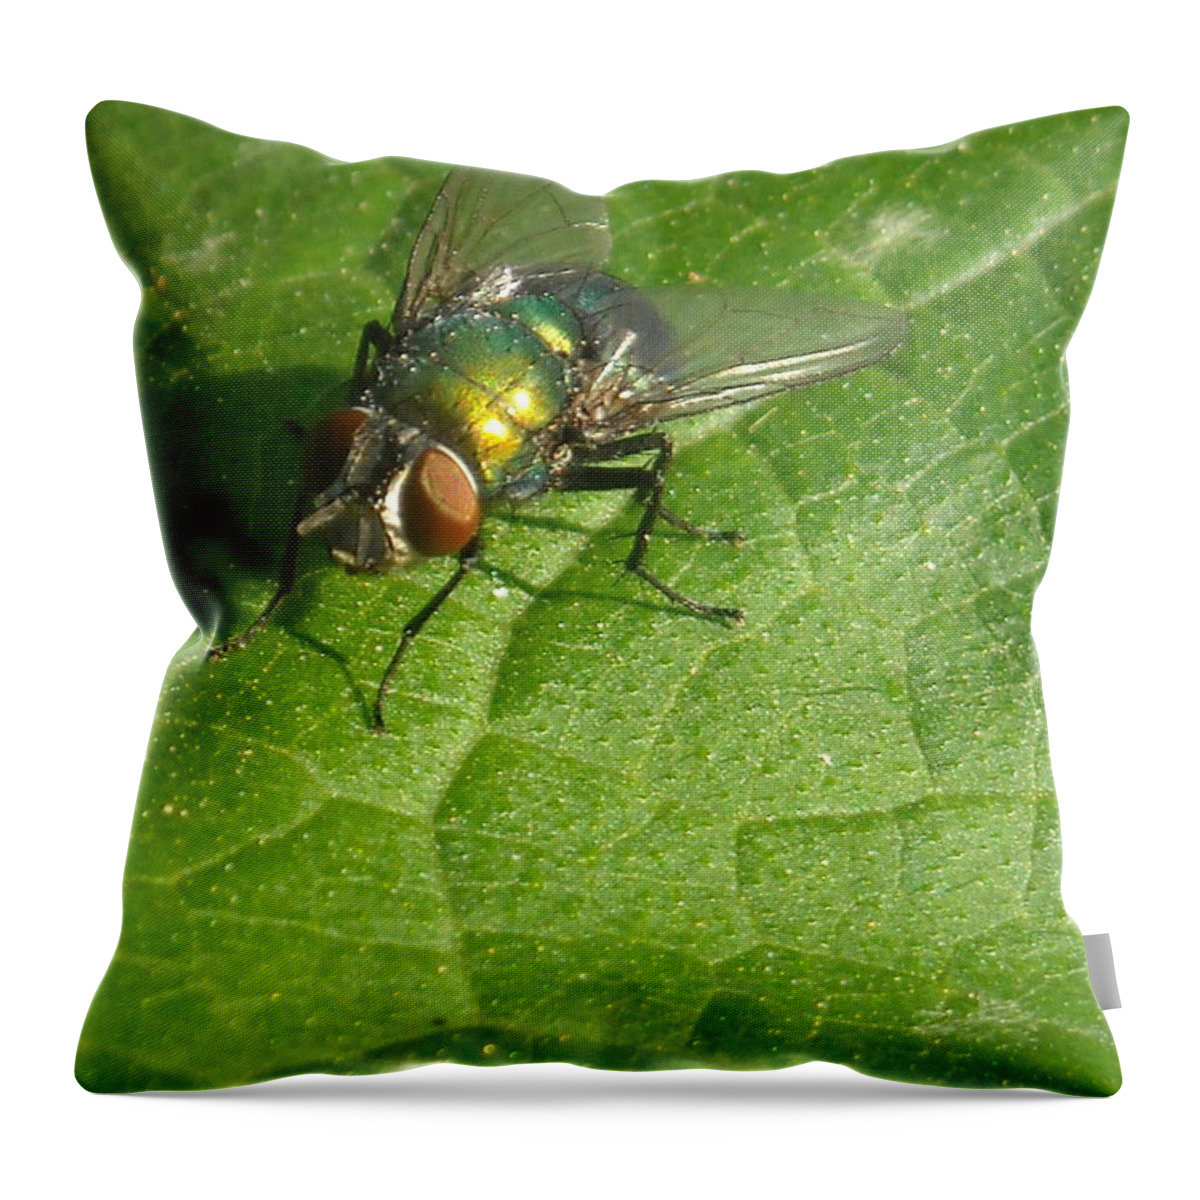 Insects Throw Pillow featuring the photograph Green Bottle Fly by Kevin Schmoldt